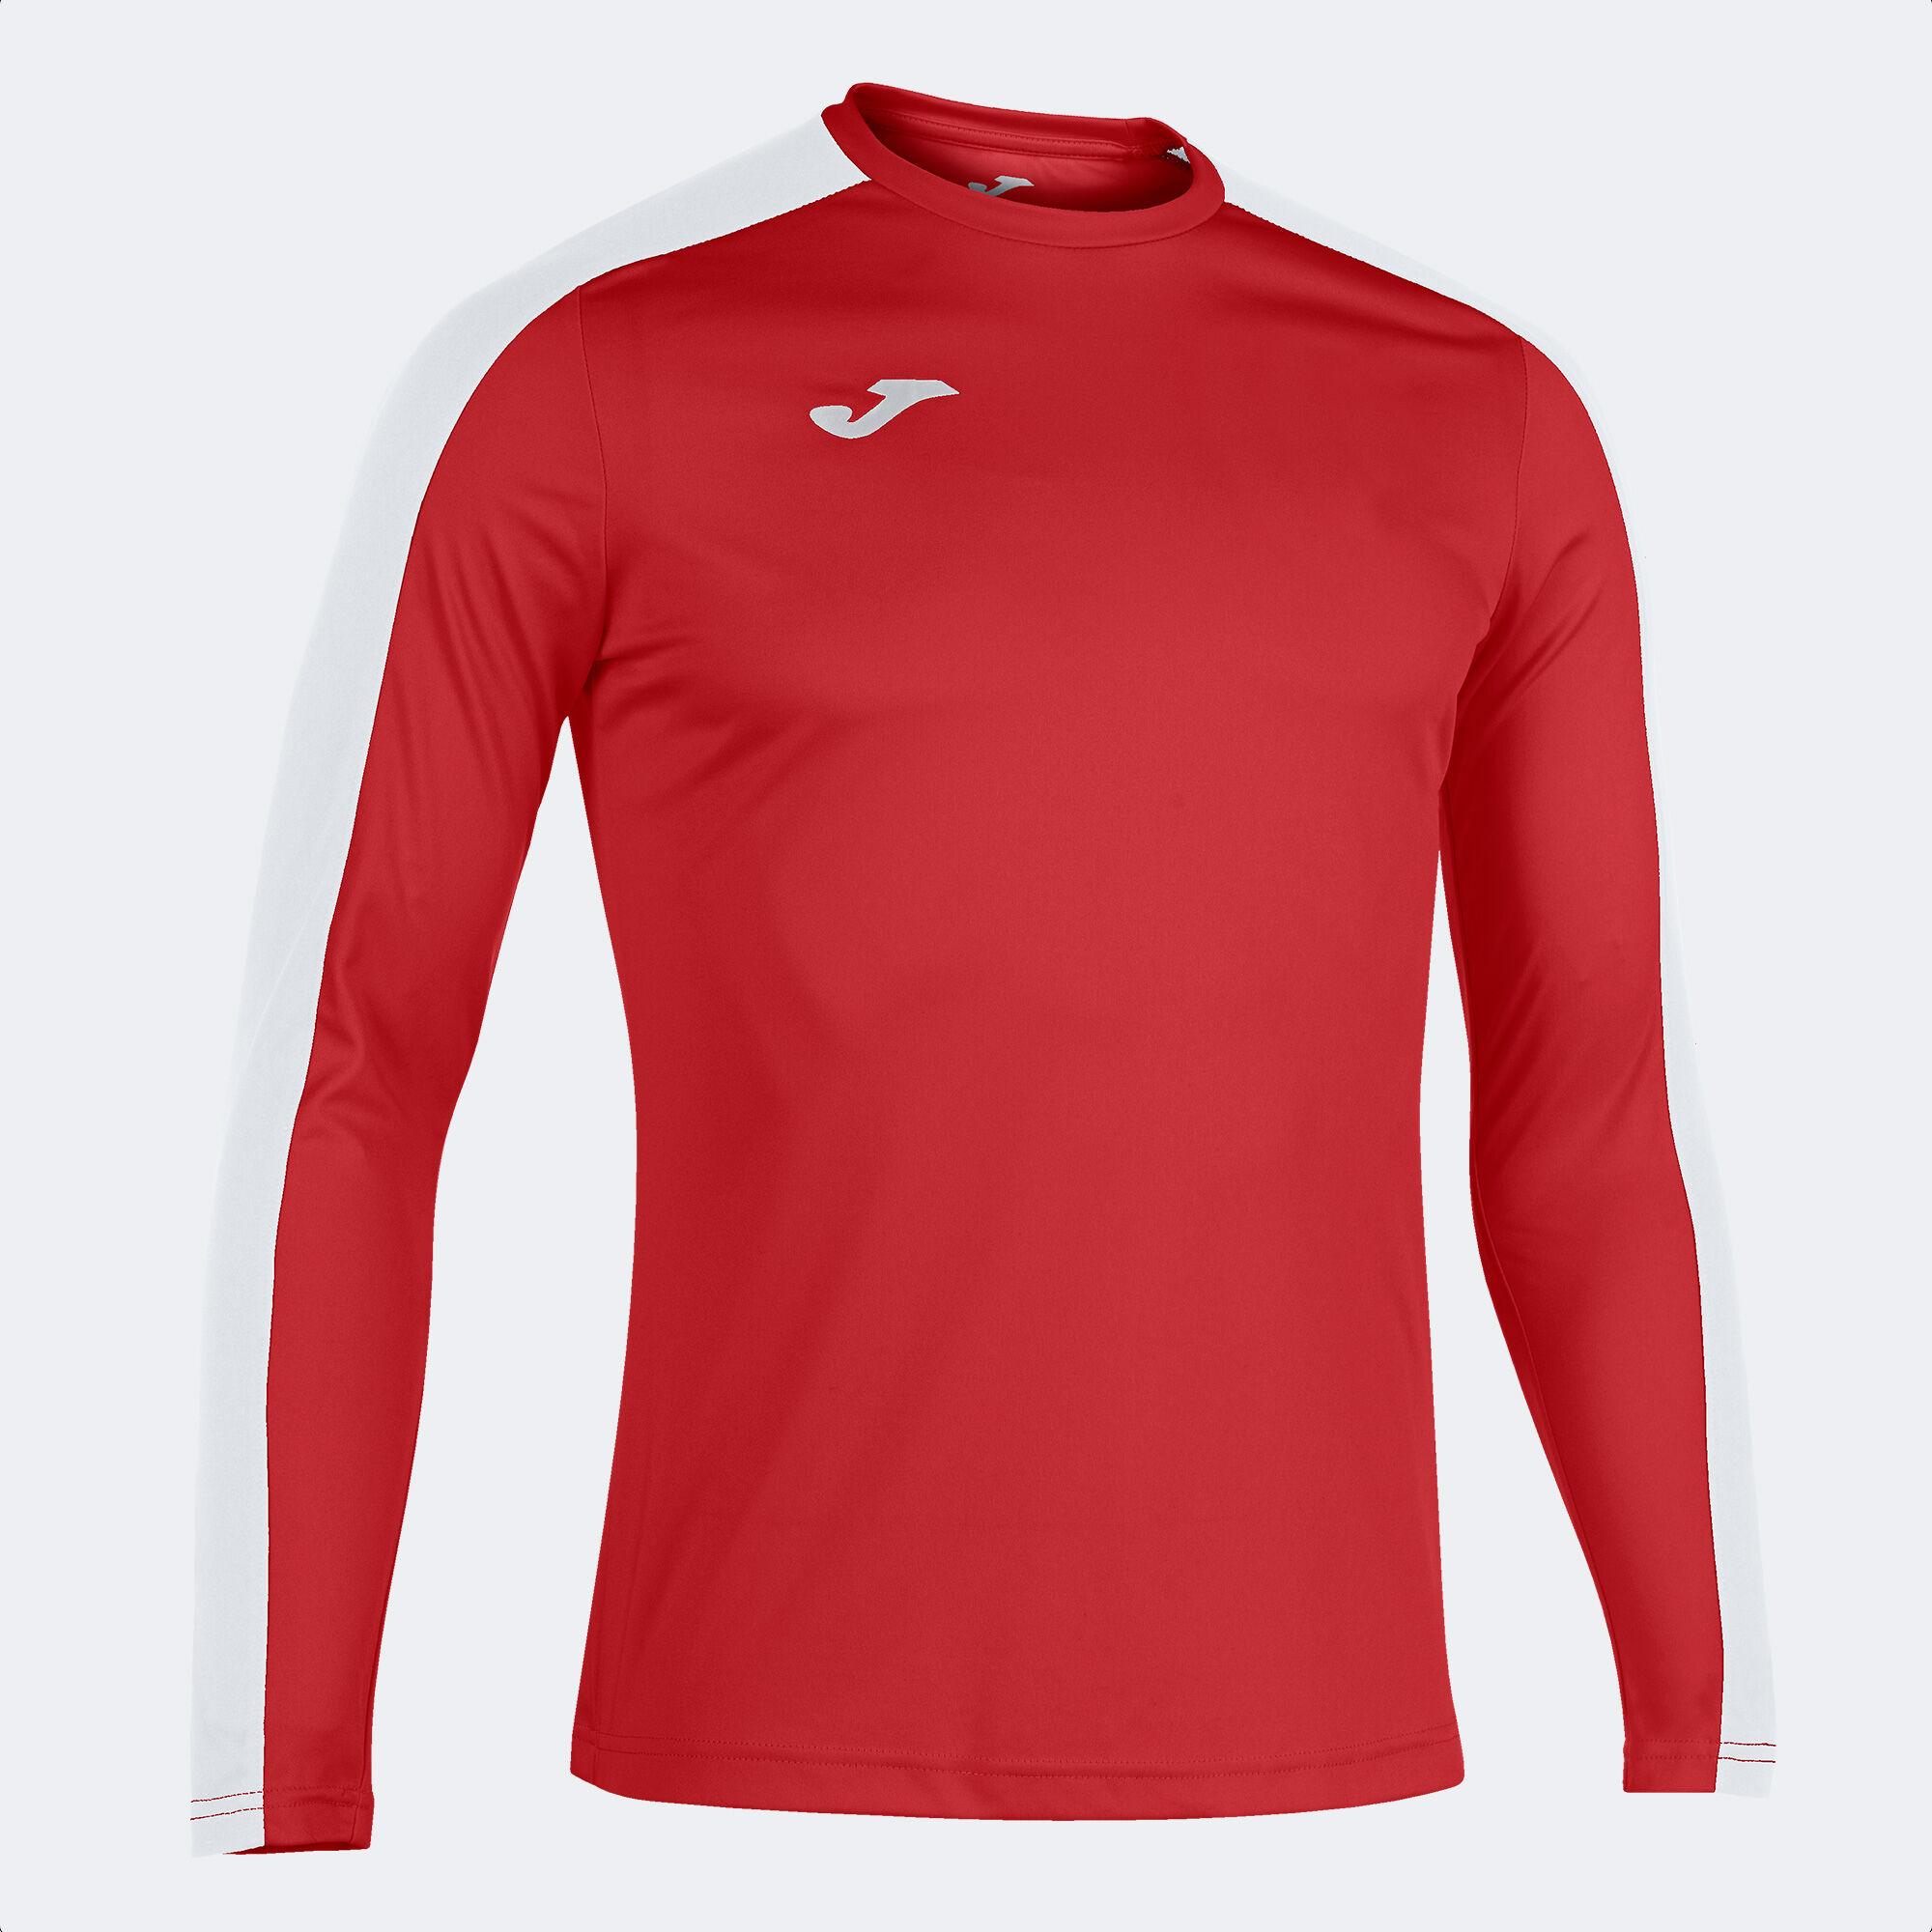 MAILLOT MANCHES LONGUES HOMME ACADEMY III ROUGE BLANC